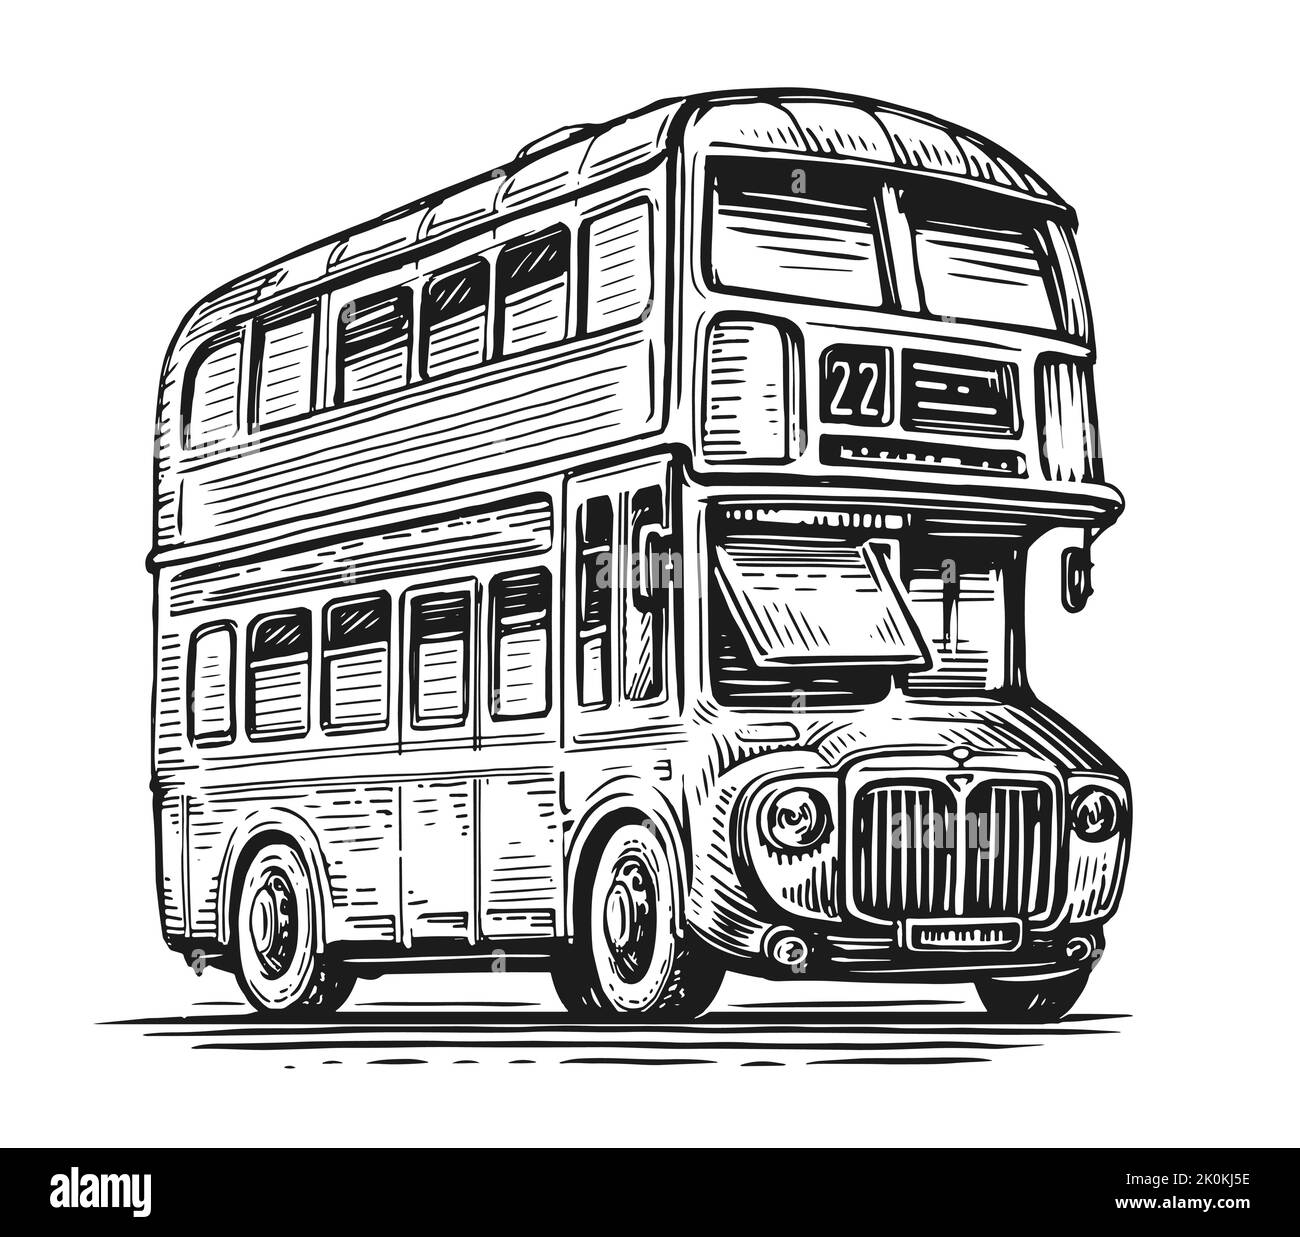 Hand drawn sketch retro London bus. England urban public transport. Vintage vector illustration isolated on white Stock Vector